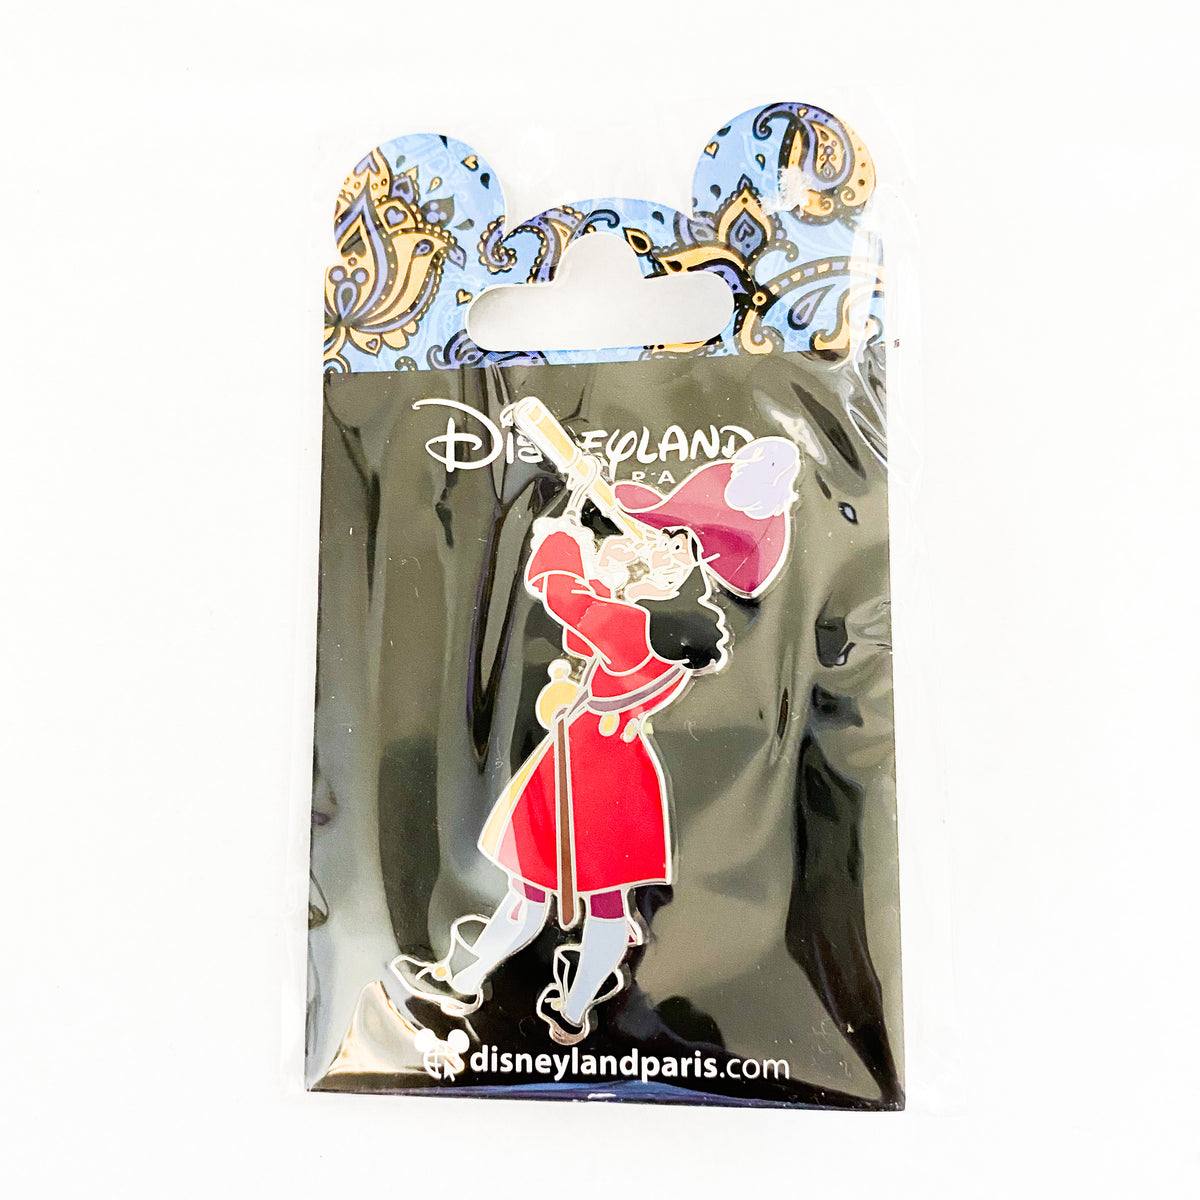 Captain Hook model sheet pin from our Pins collection, Disney collectibles  and memorabilia